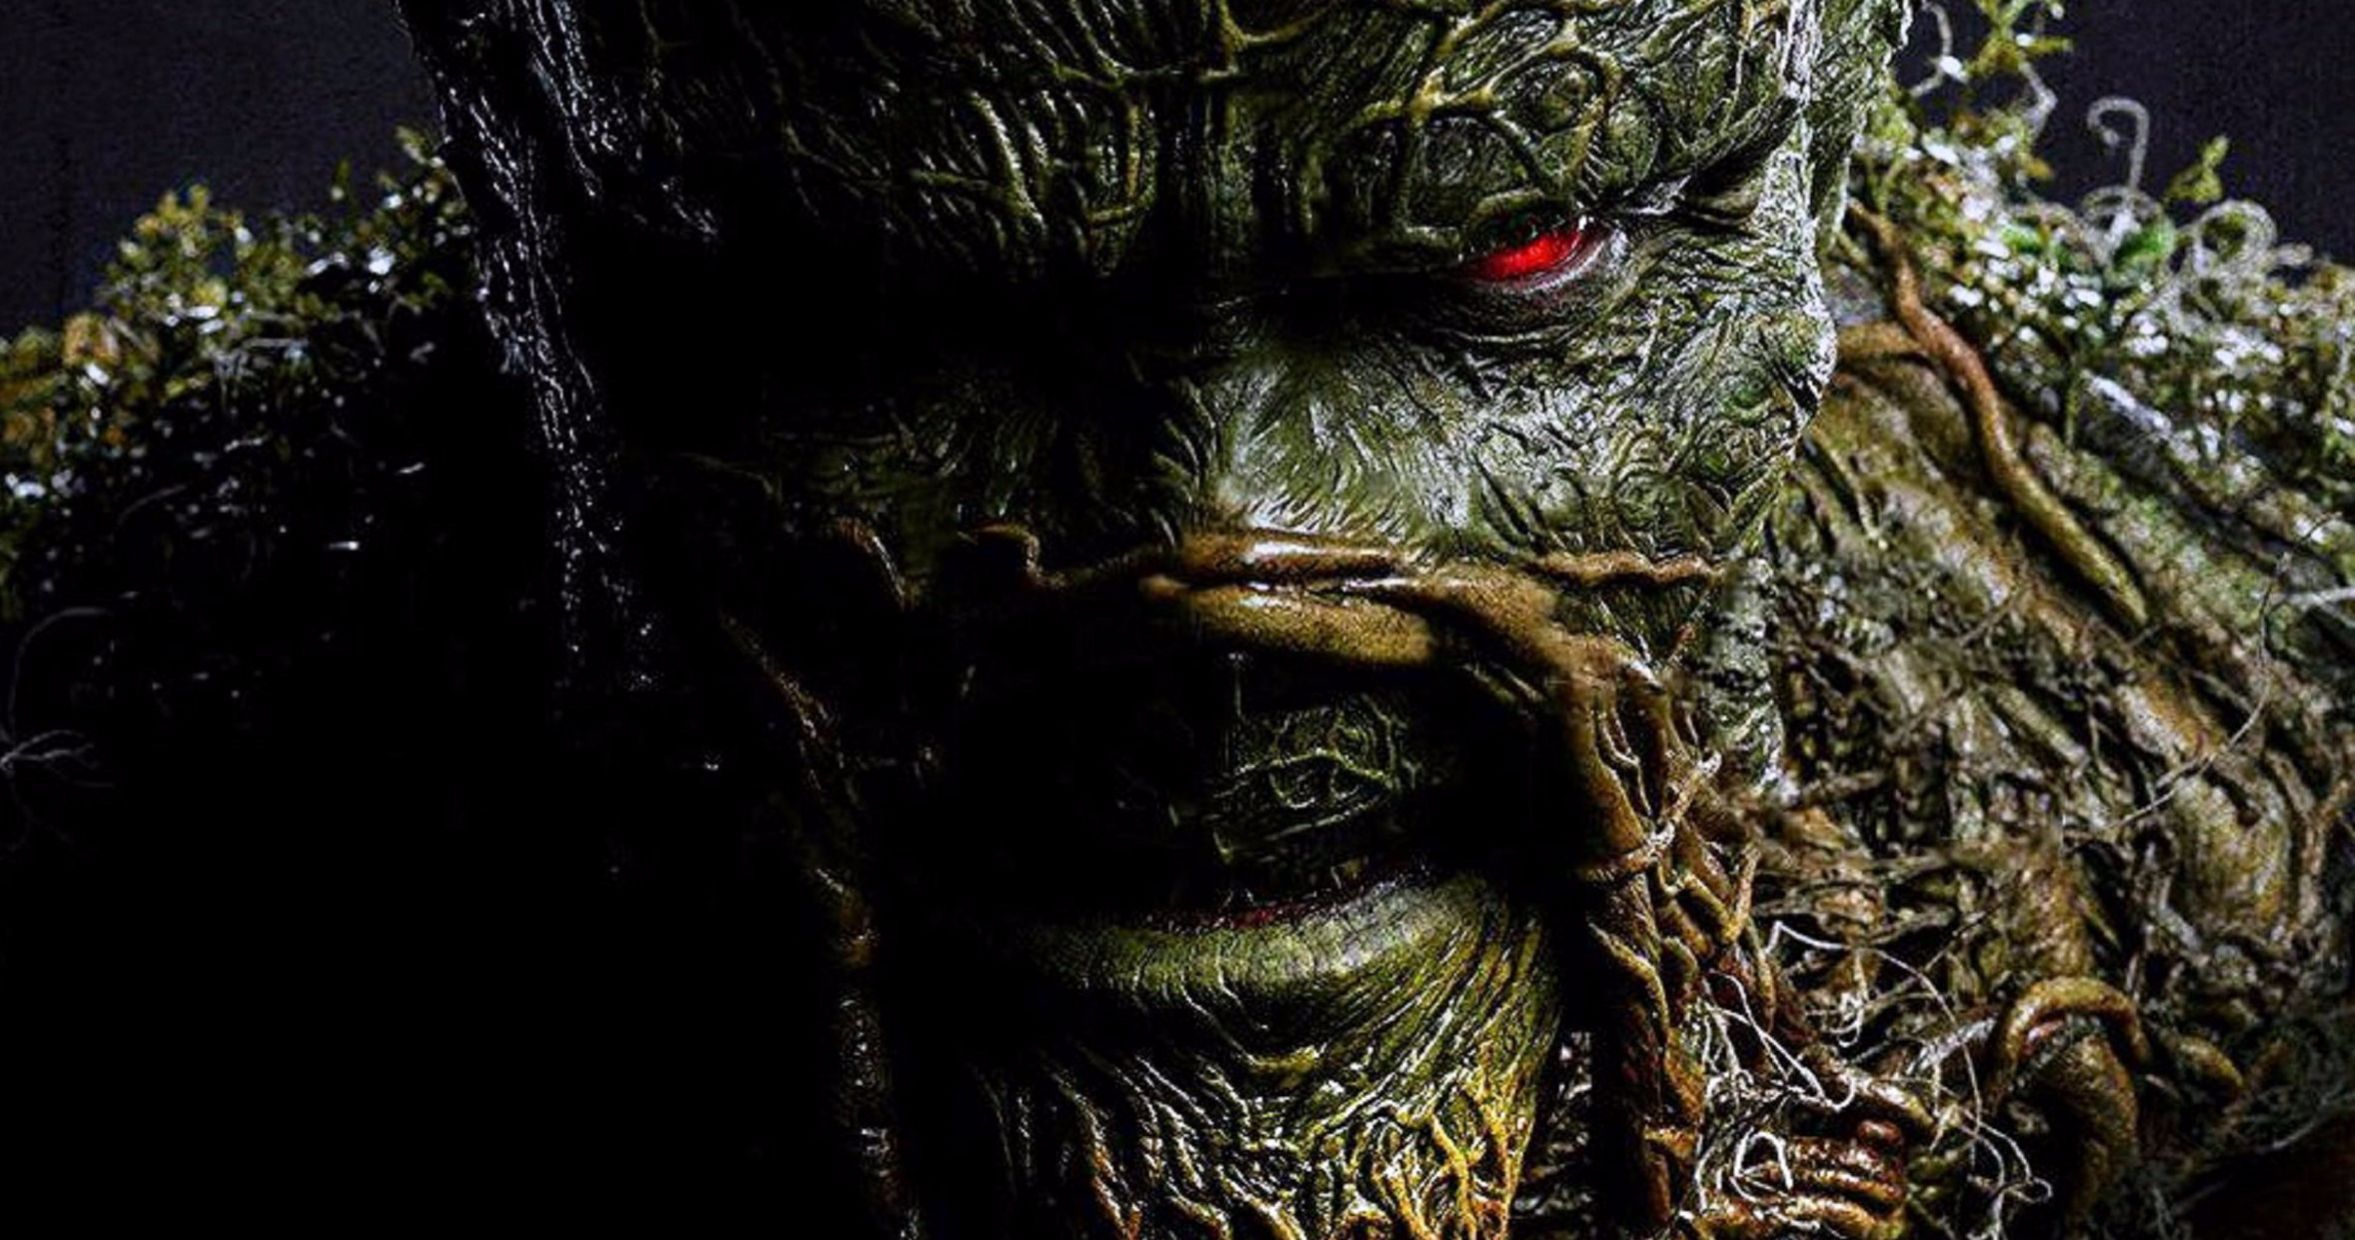 Why Was Swamp Thing Really Canceled? James Wan Doesn't Have a Clue